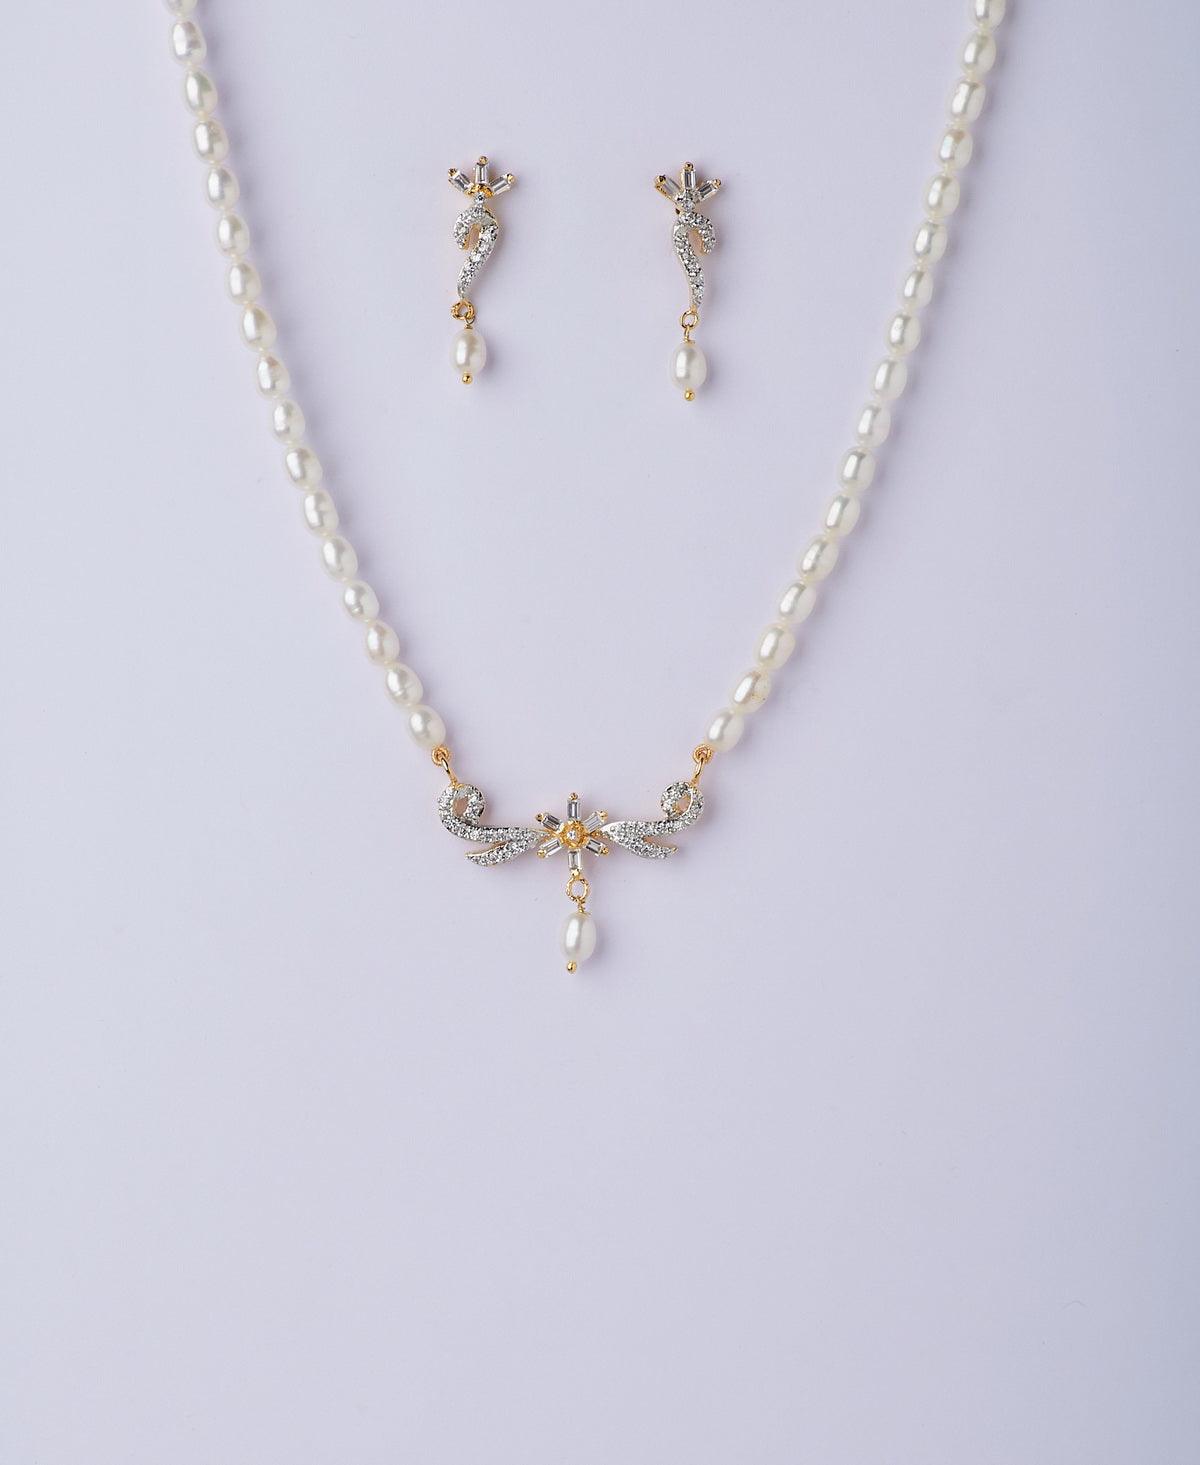 Florial Stone Studded Pearl Necklace Set - Chandrani Pearls